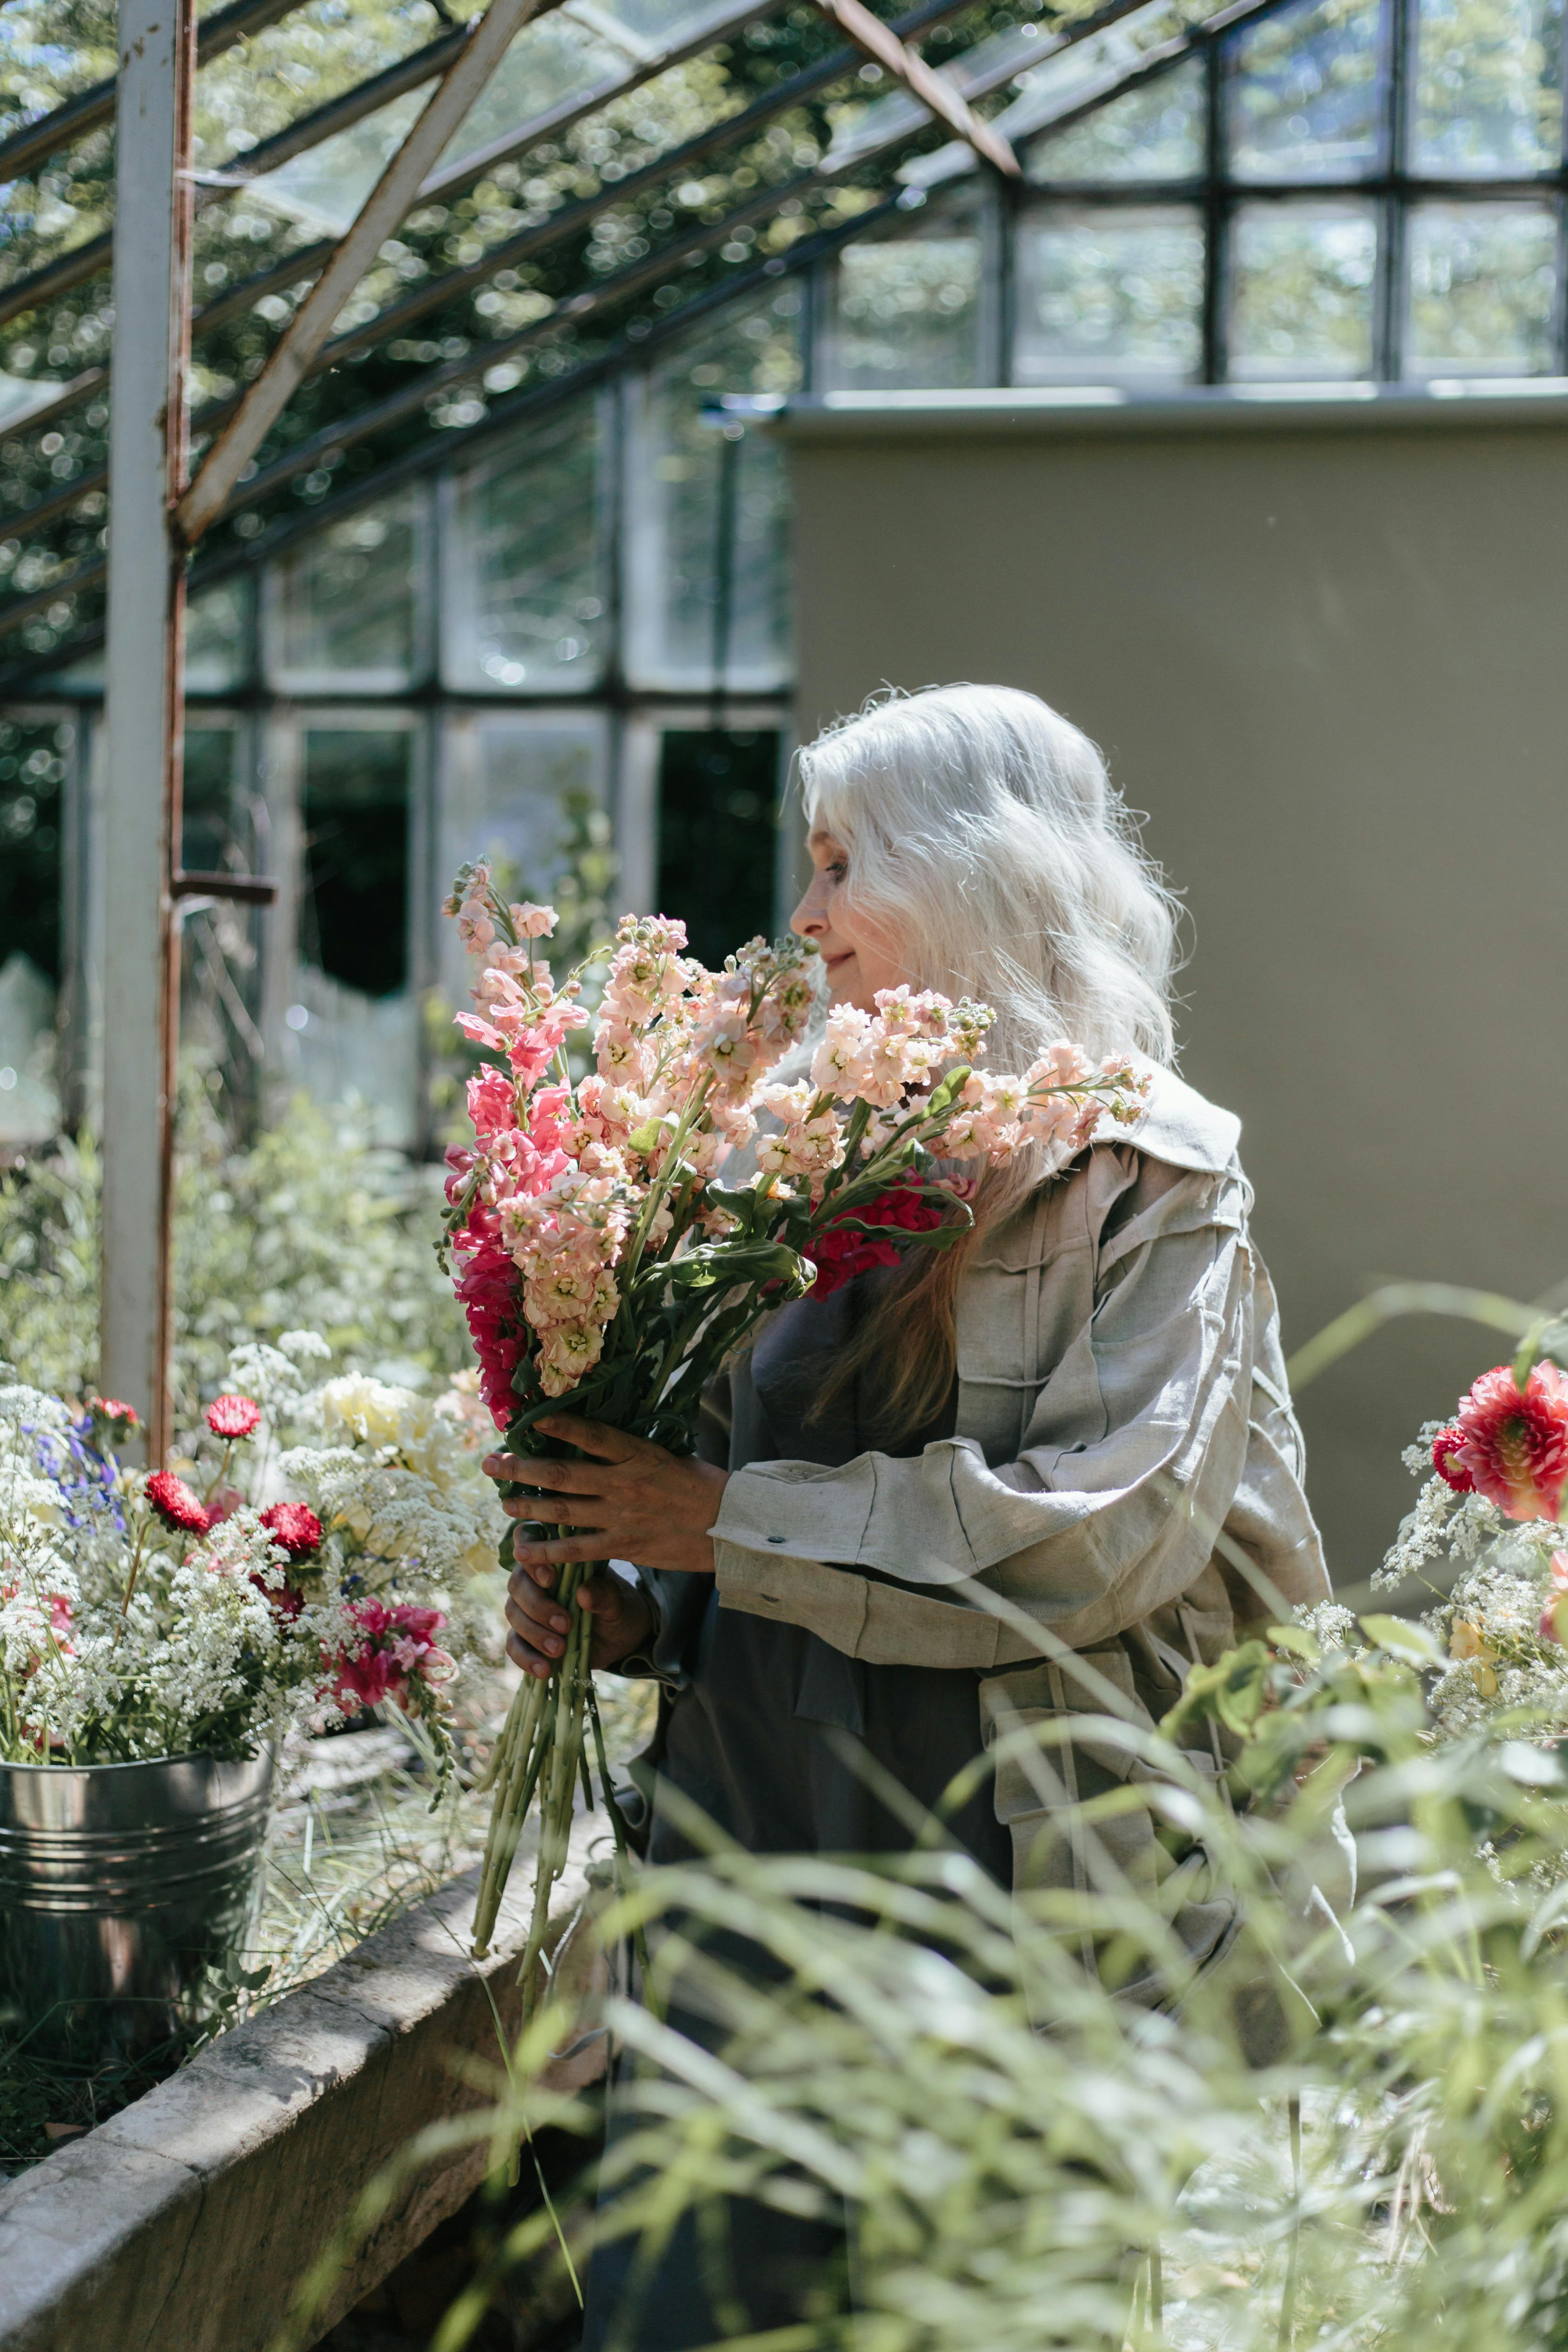 A happy woman holding a bouquet of flowers | Source: Pexels